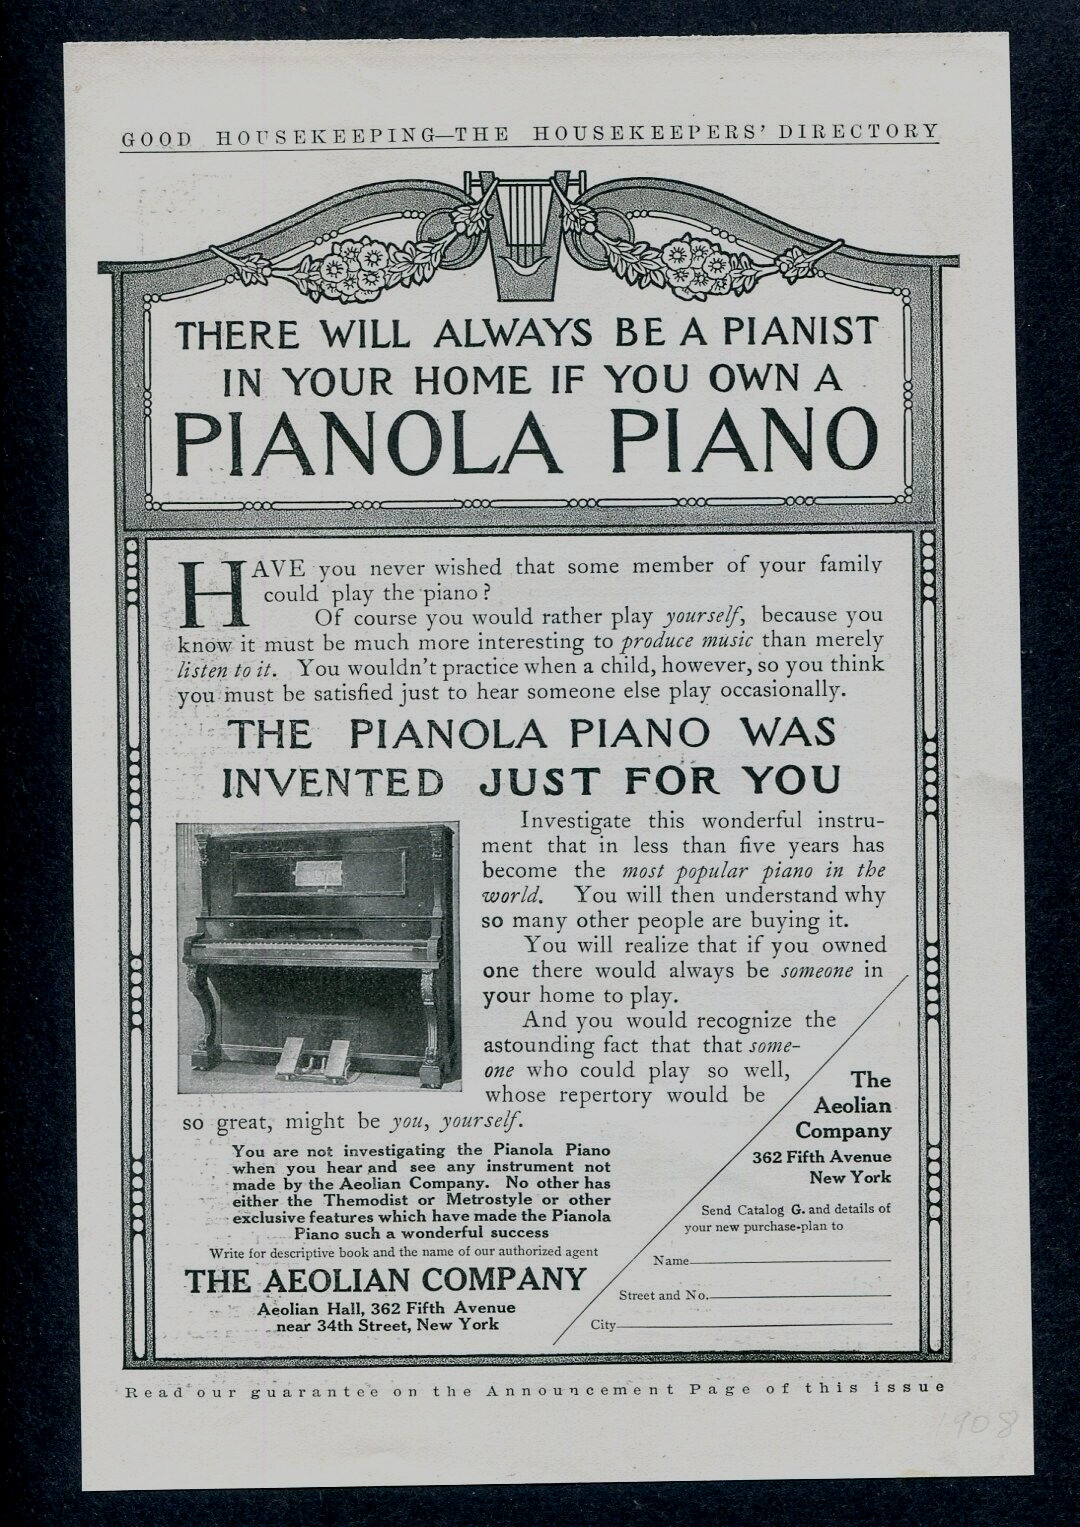 1908 Aeolian Pianola Piano Ad Print -There will always Be a Pianist in Your Home